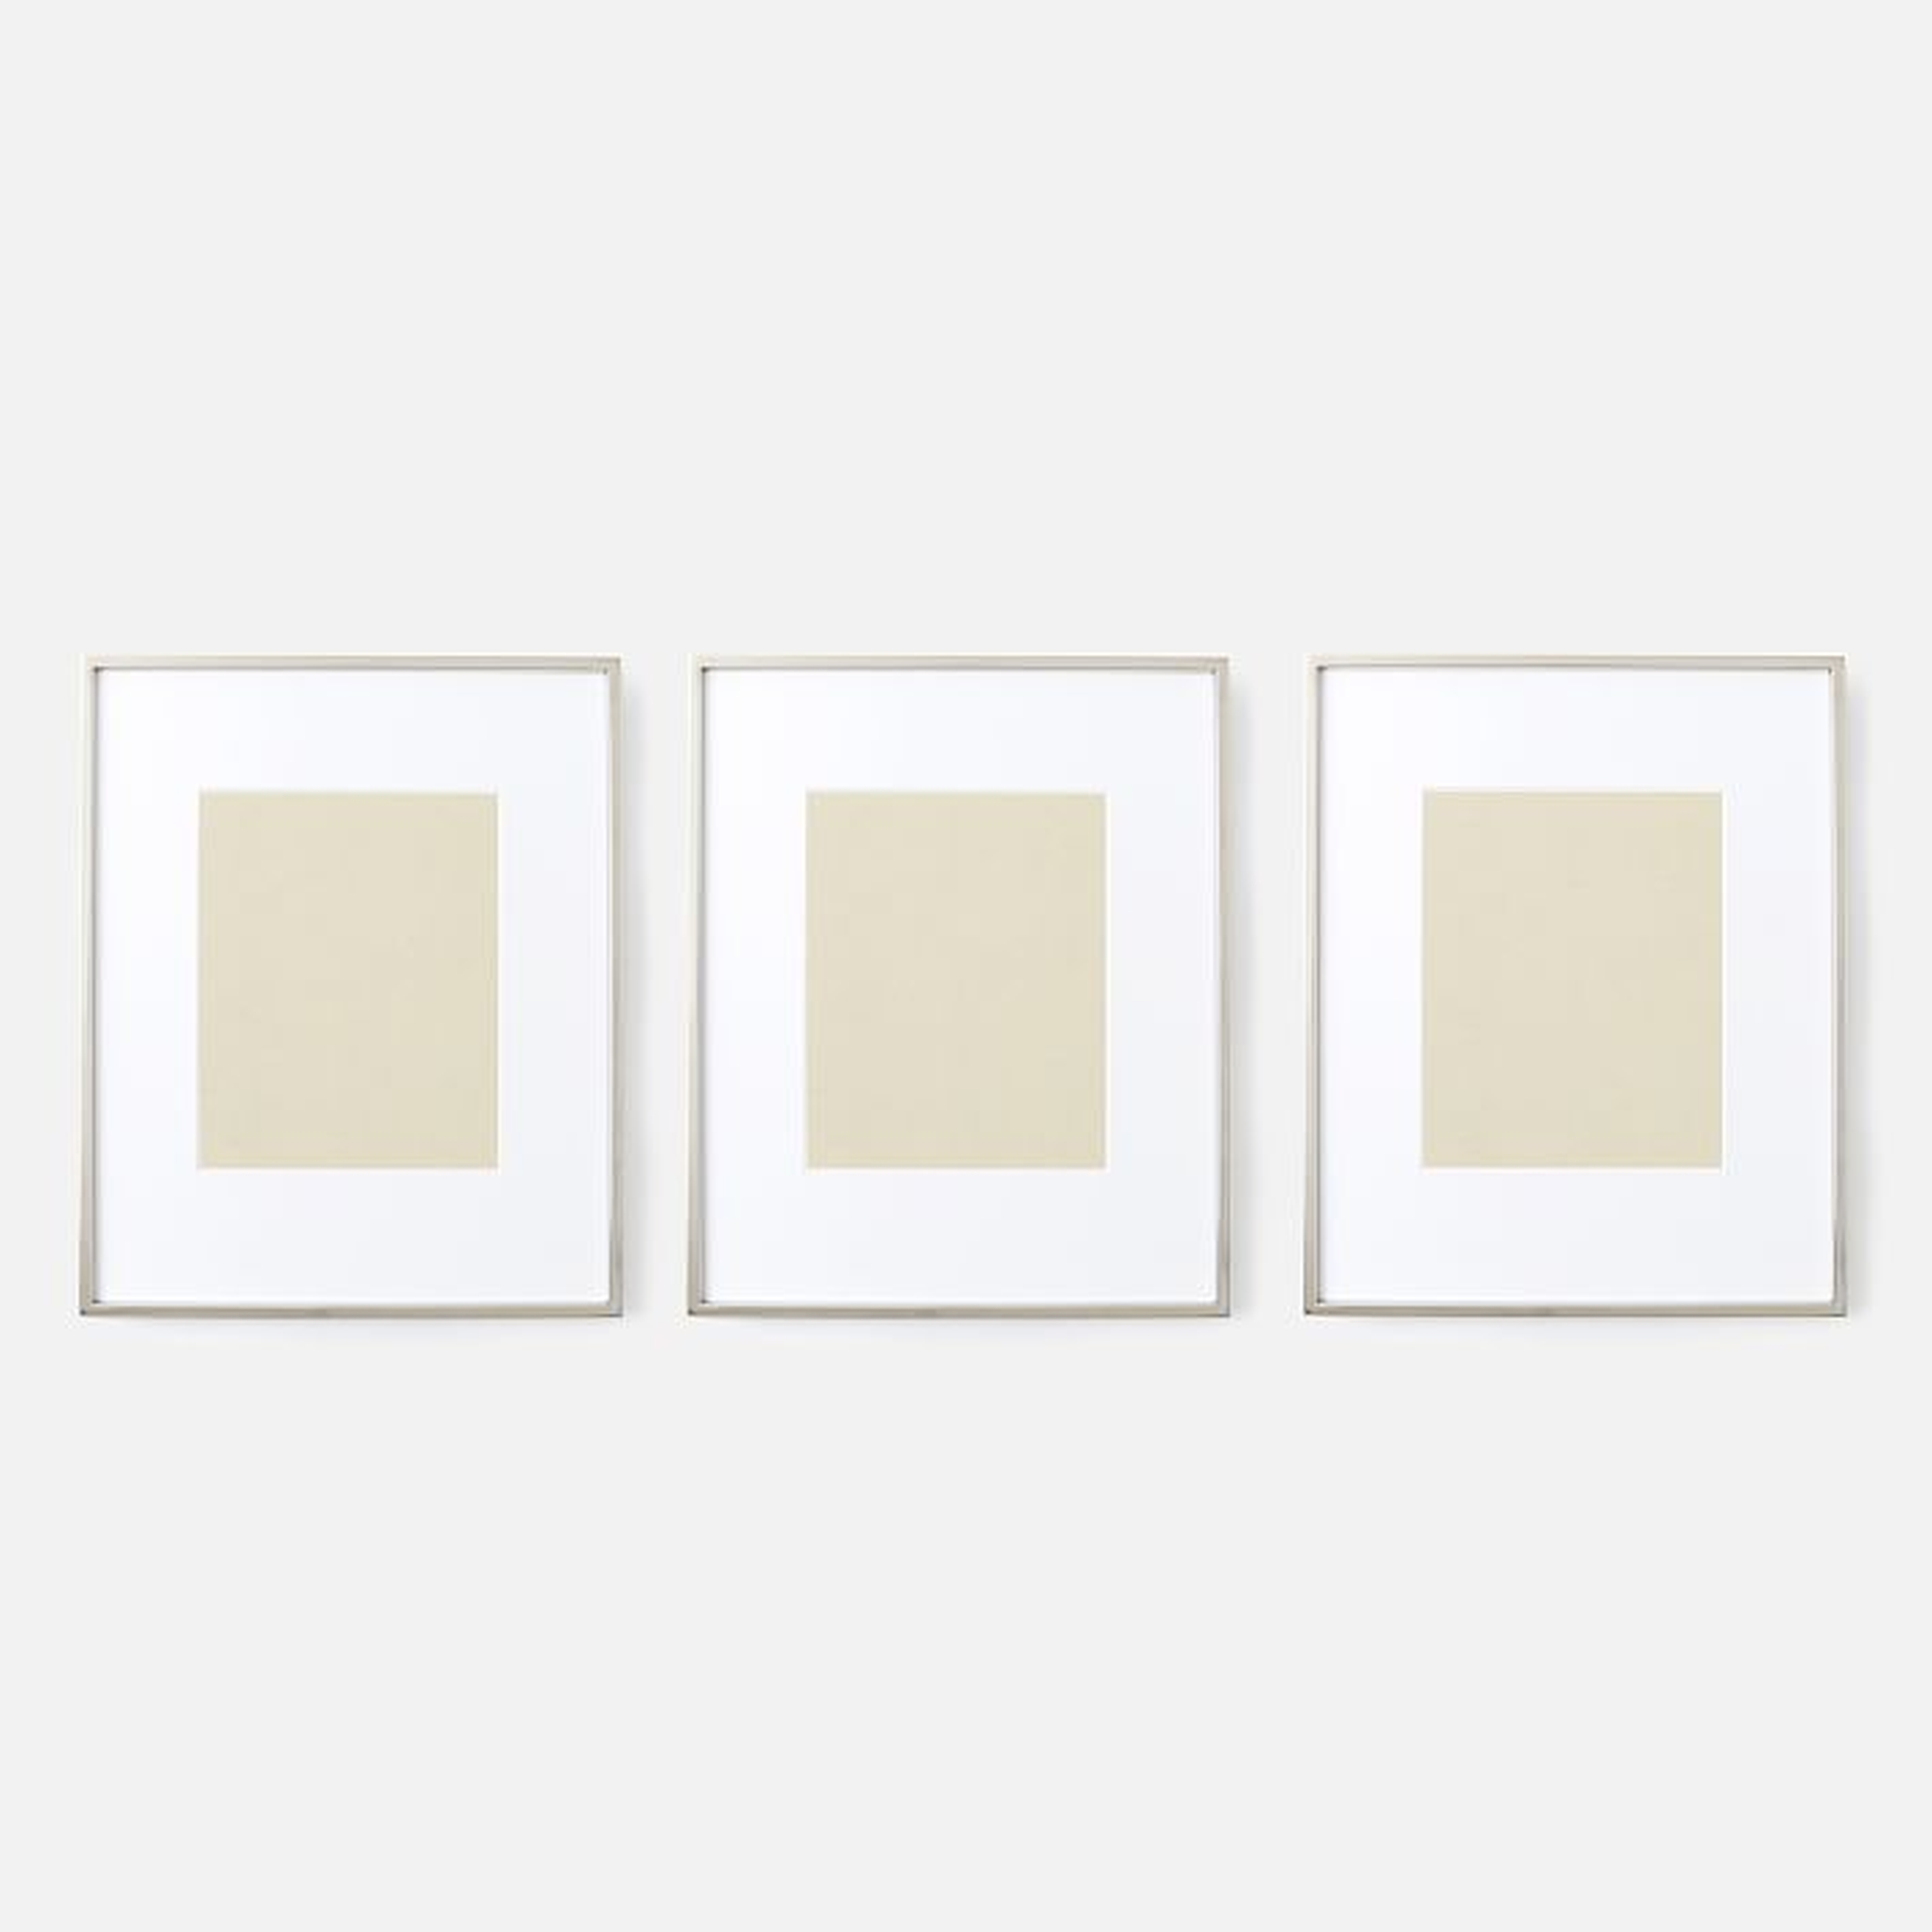 Gallery Frame, Polished Nickel, 8" x 10" (12.75" x 15.75" without mat) - Set of 3 - West Elm